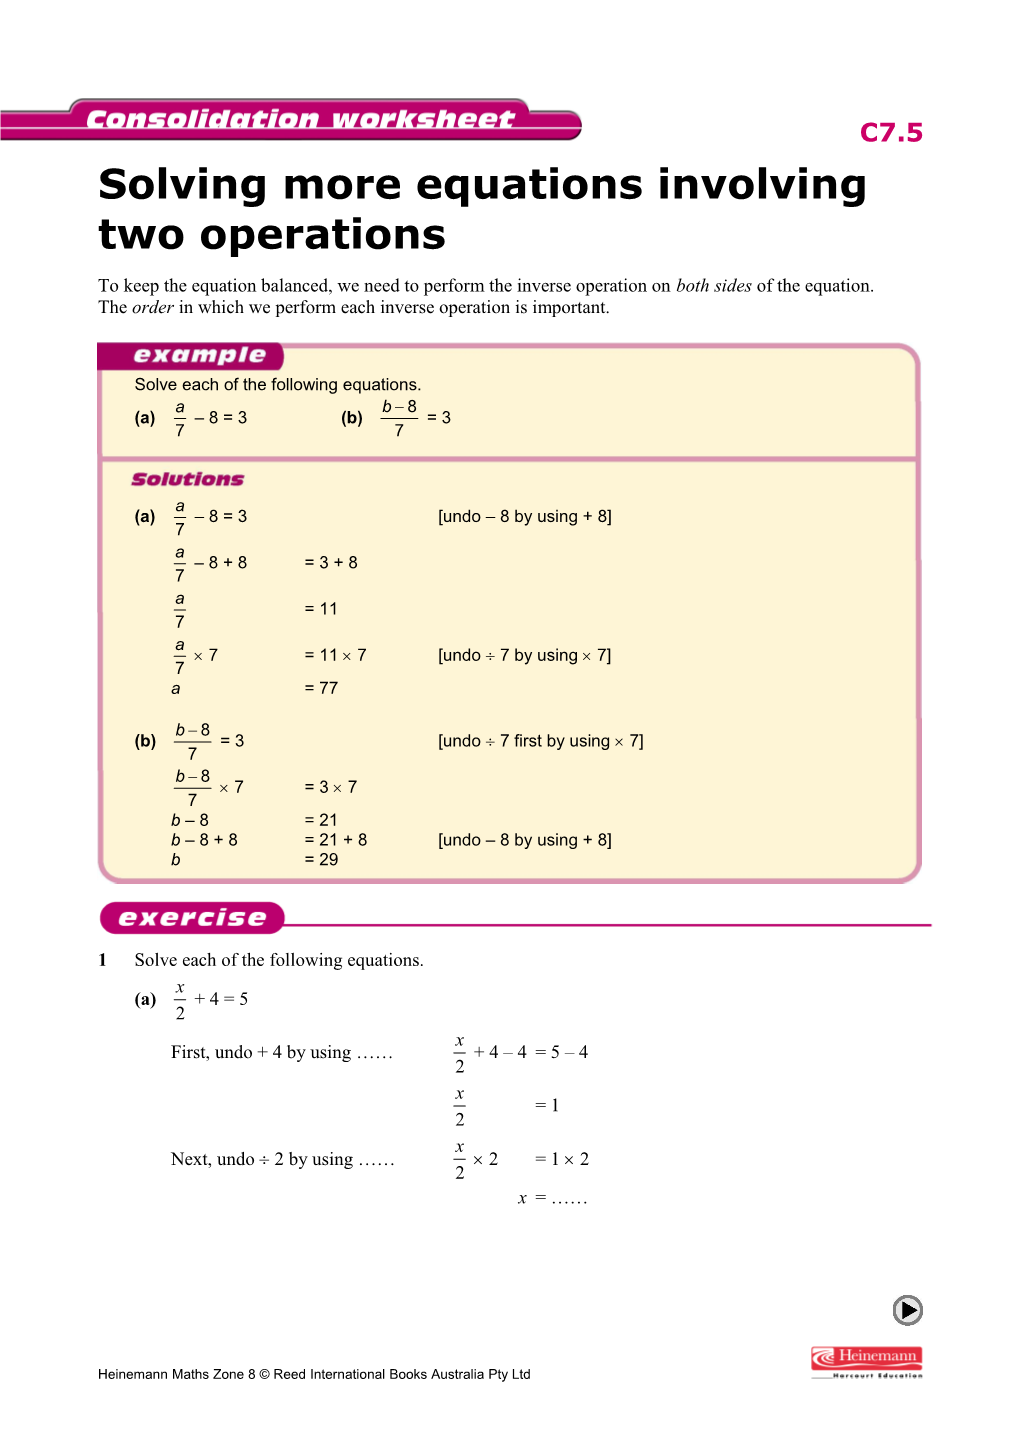 Solving More Equations Involving Two Operations